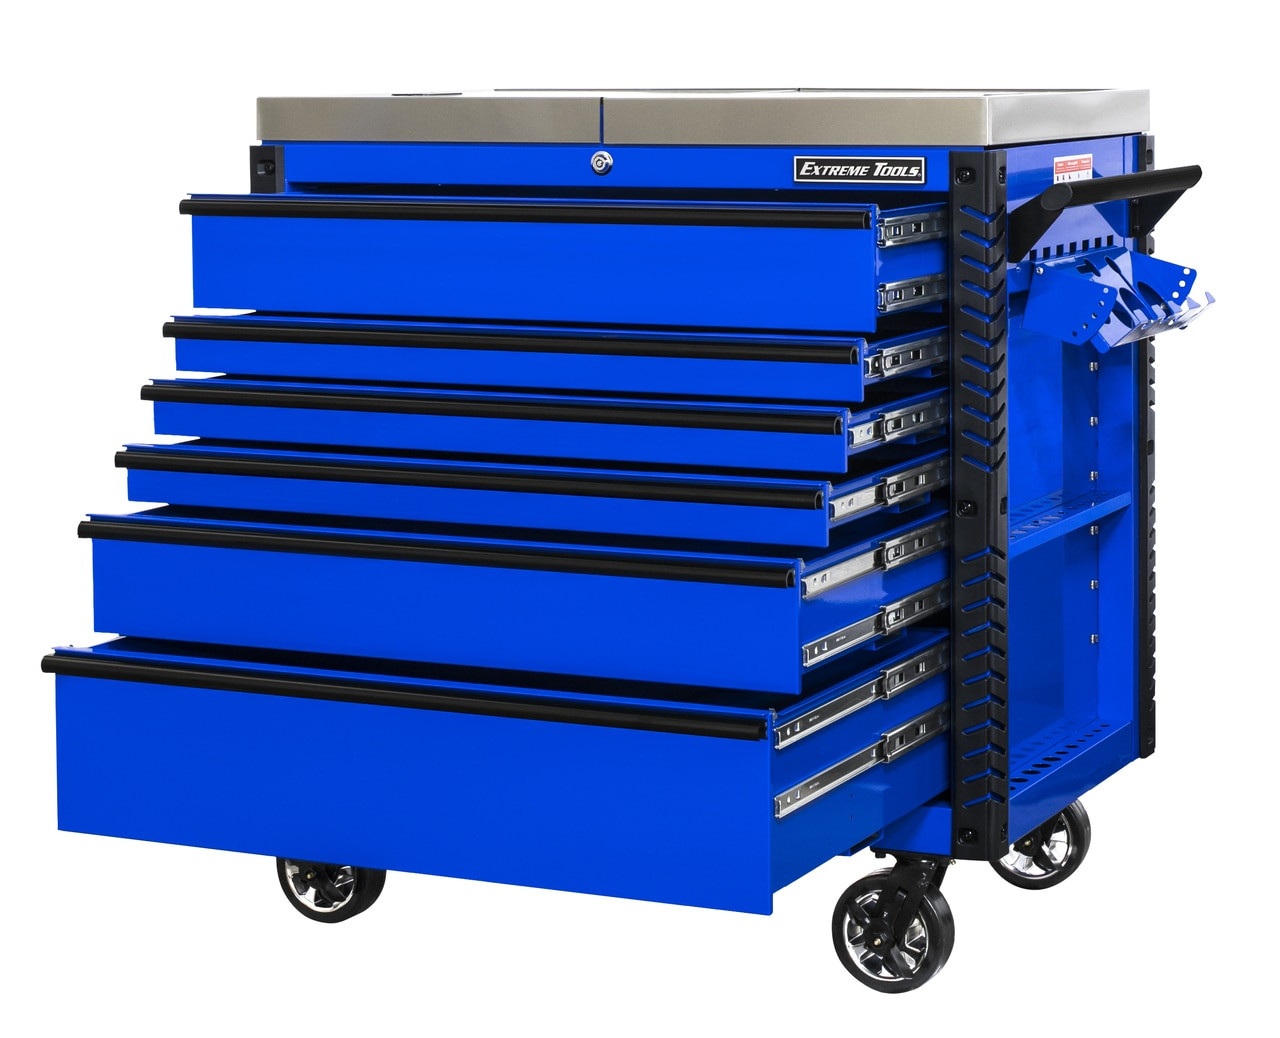 Extreme Tools EX4106TCSBLBK 41 6 Drawer Deluxe Series Sliding Top Cart,  Blue